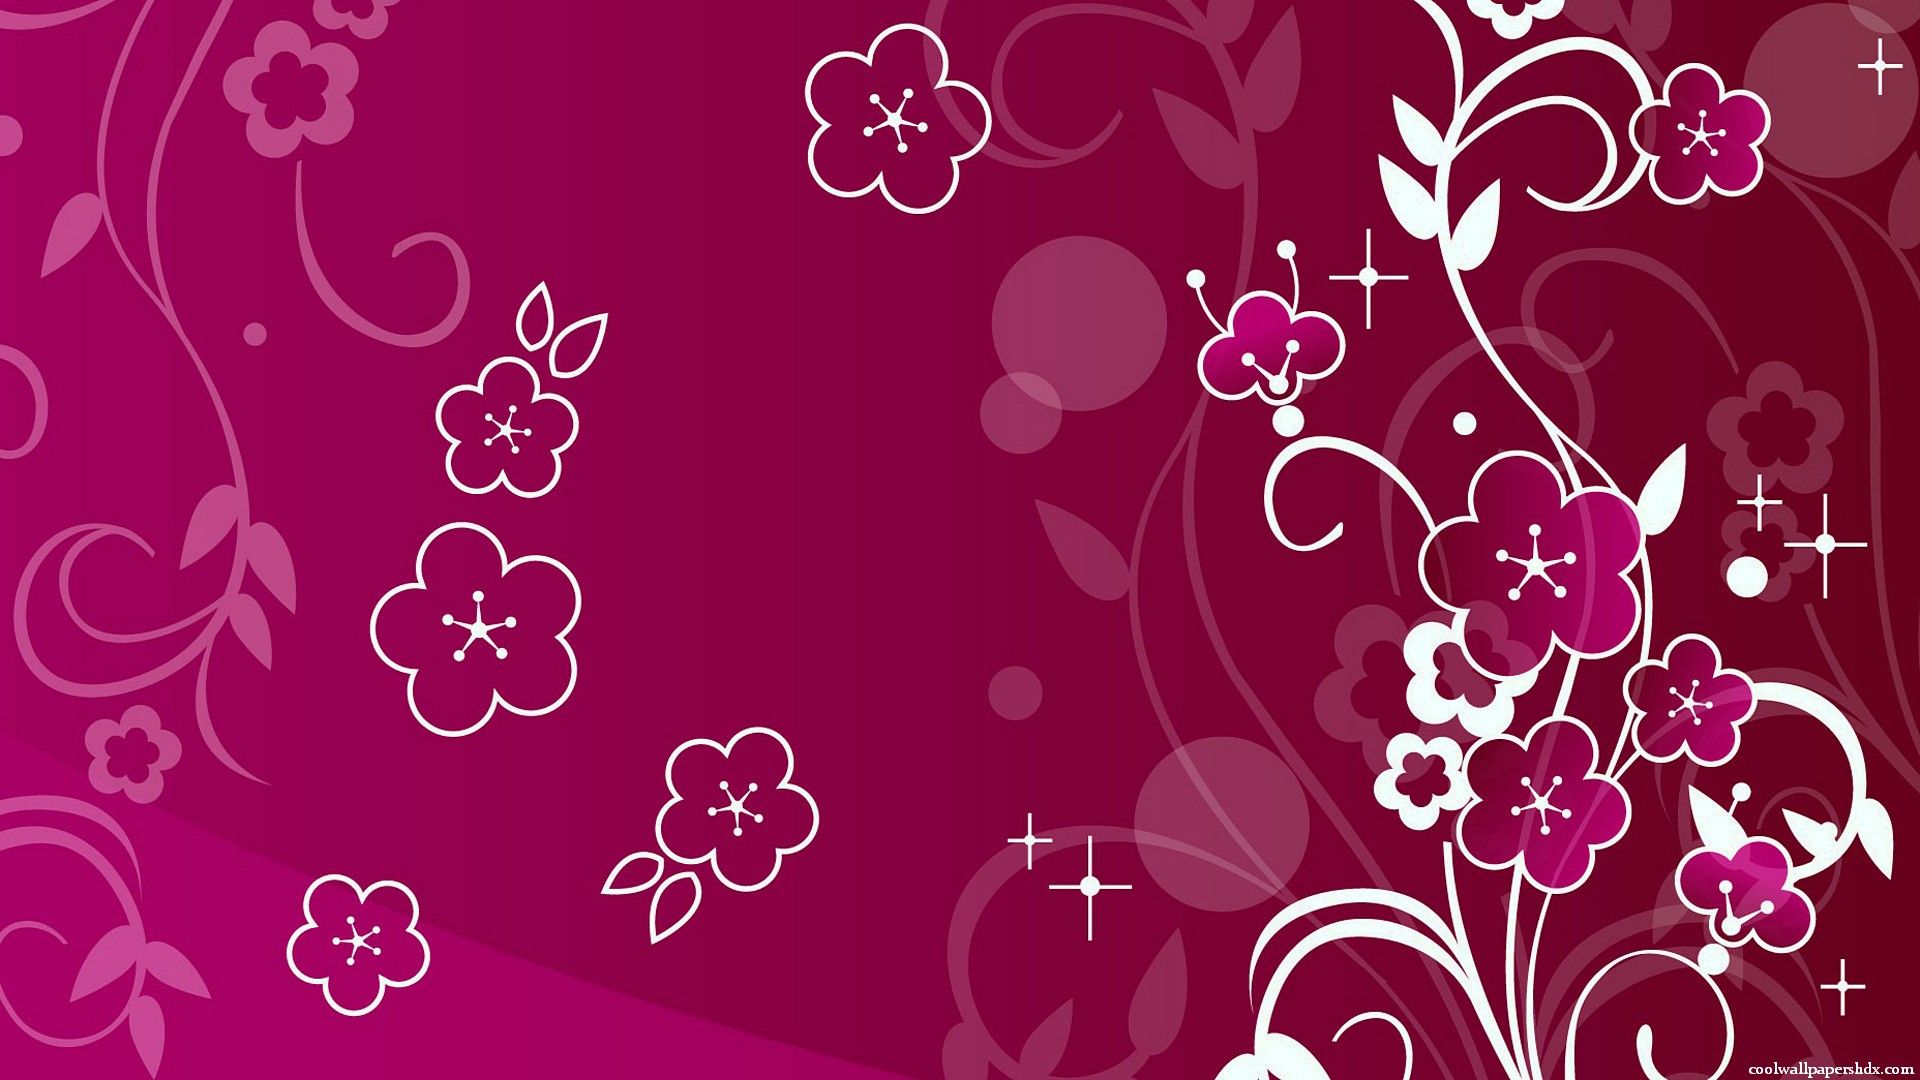 Best 49+ Girly Windows Backgrounds on HipWallpapers